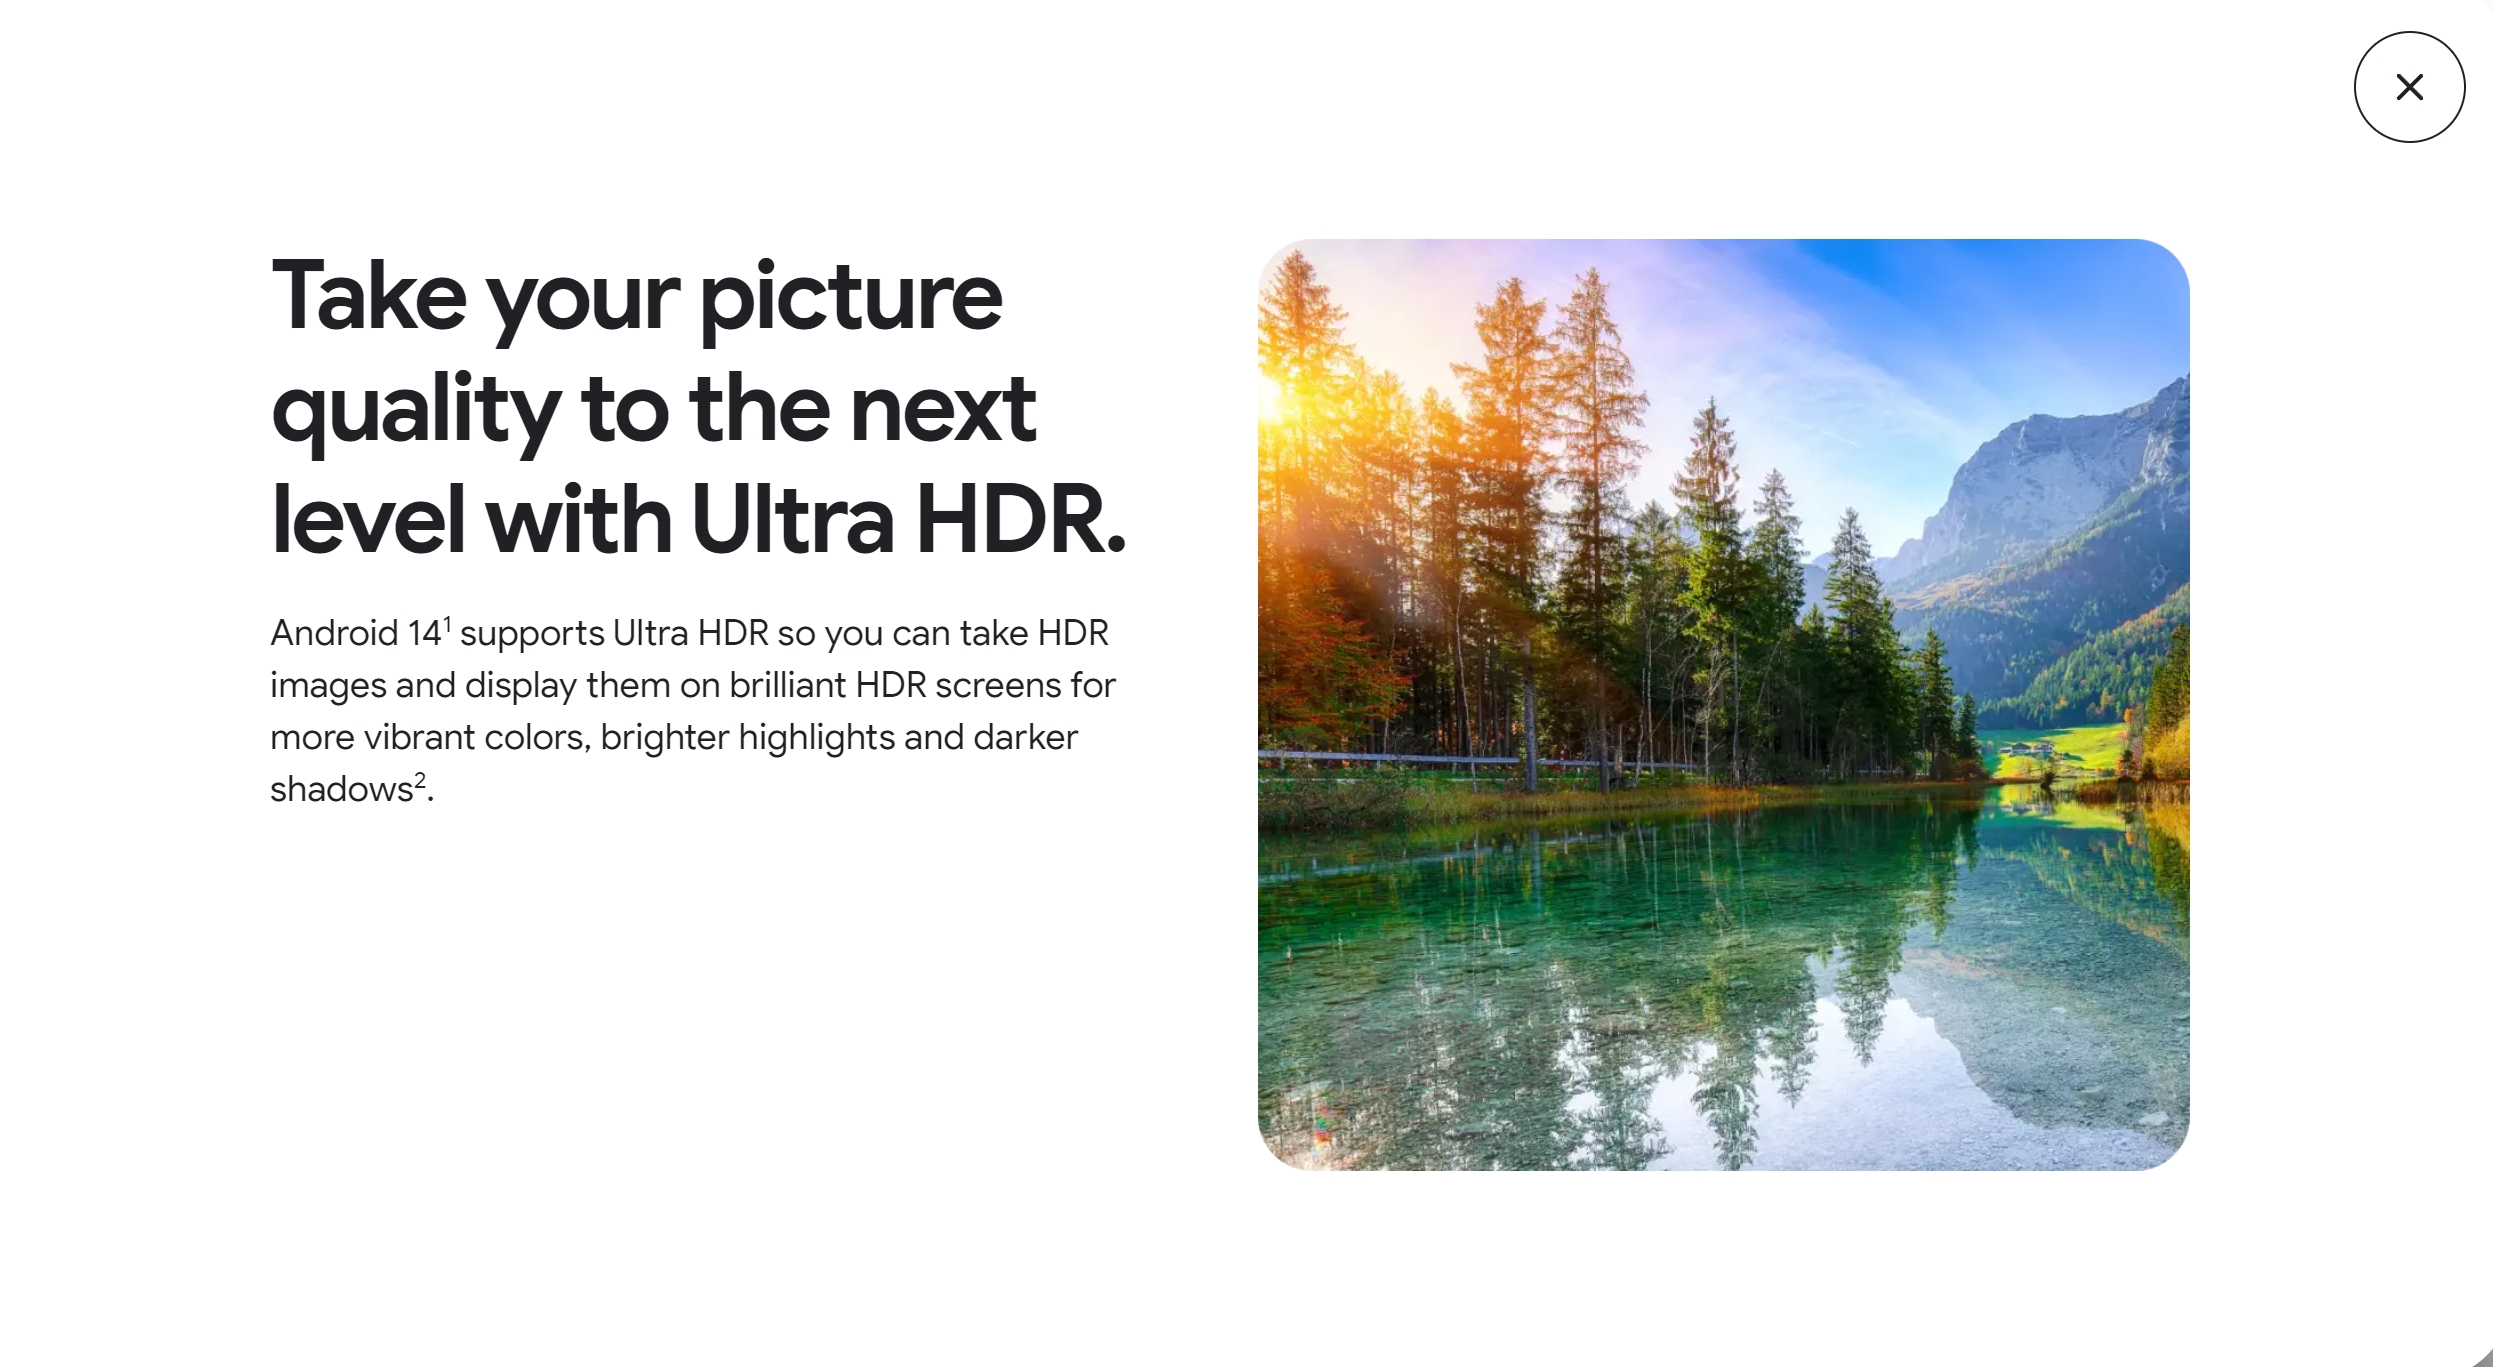 Display Ultra HDR images, Android media